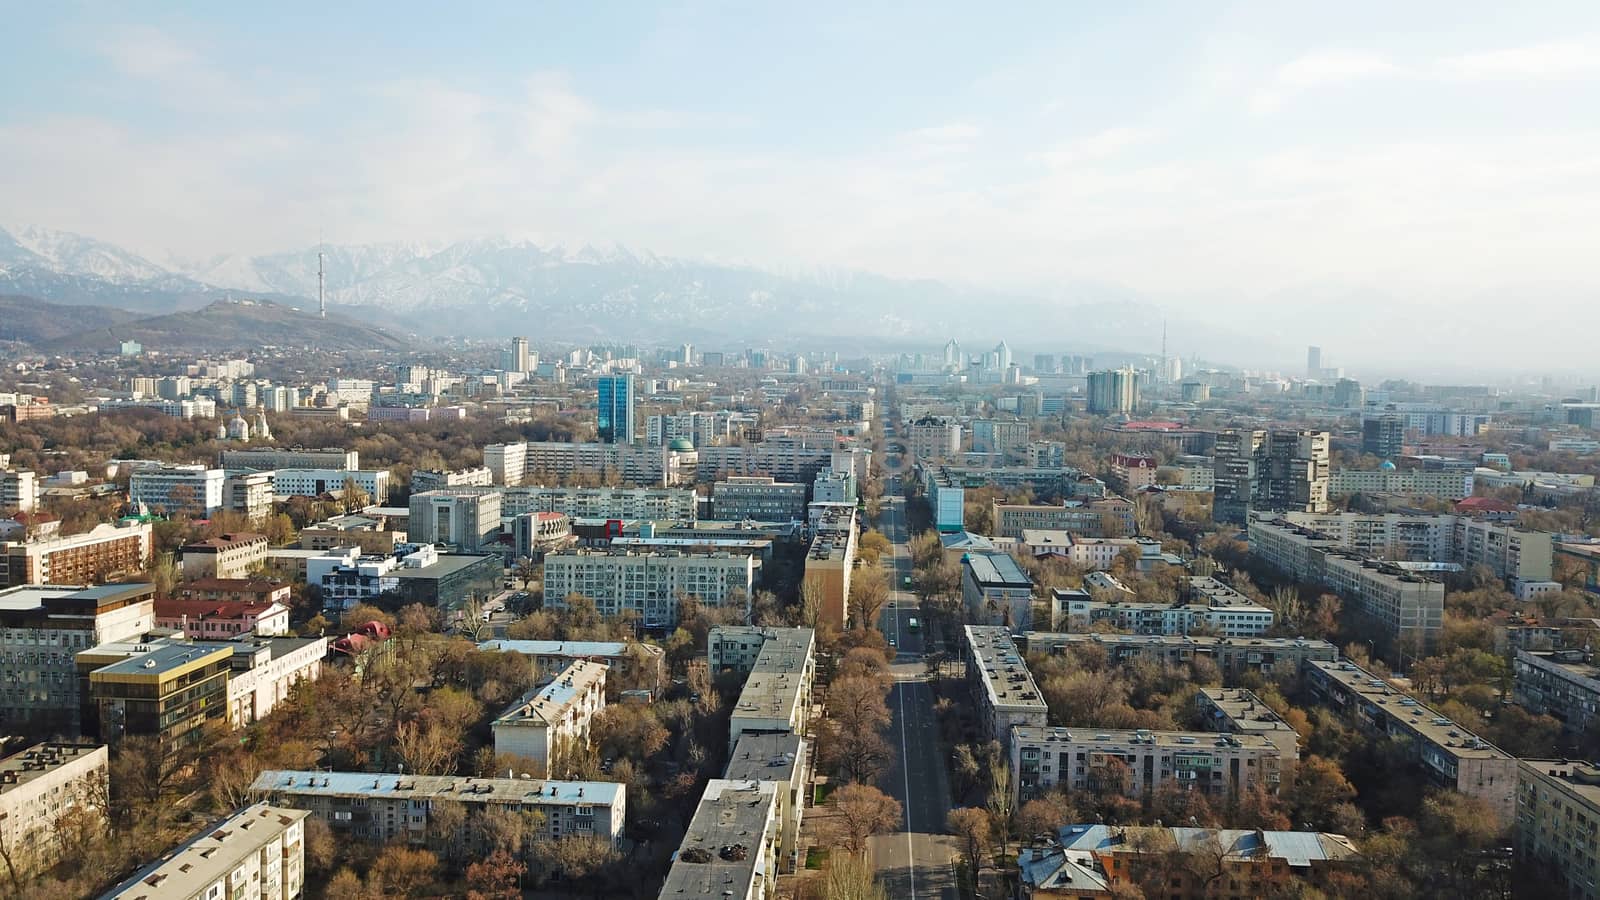 Spring city of Almaty during the quarantine period by Passcal